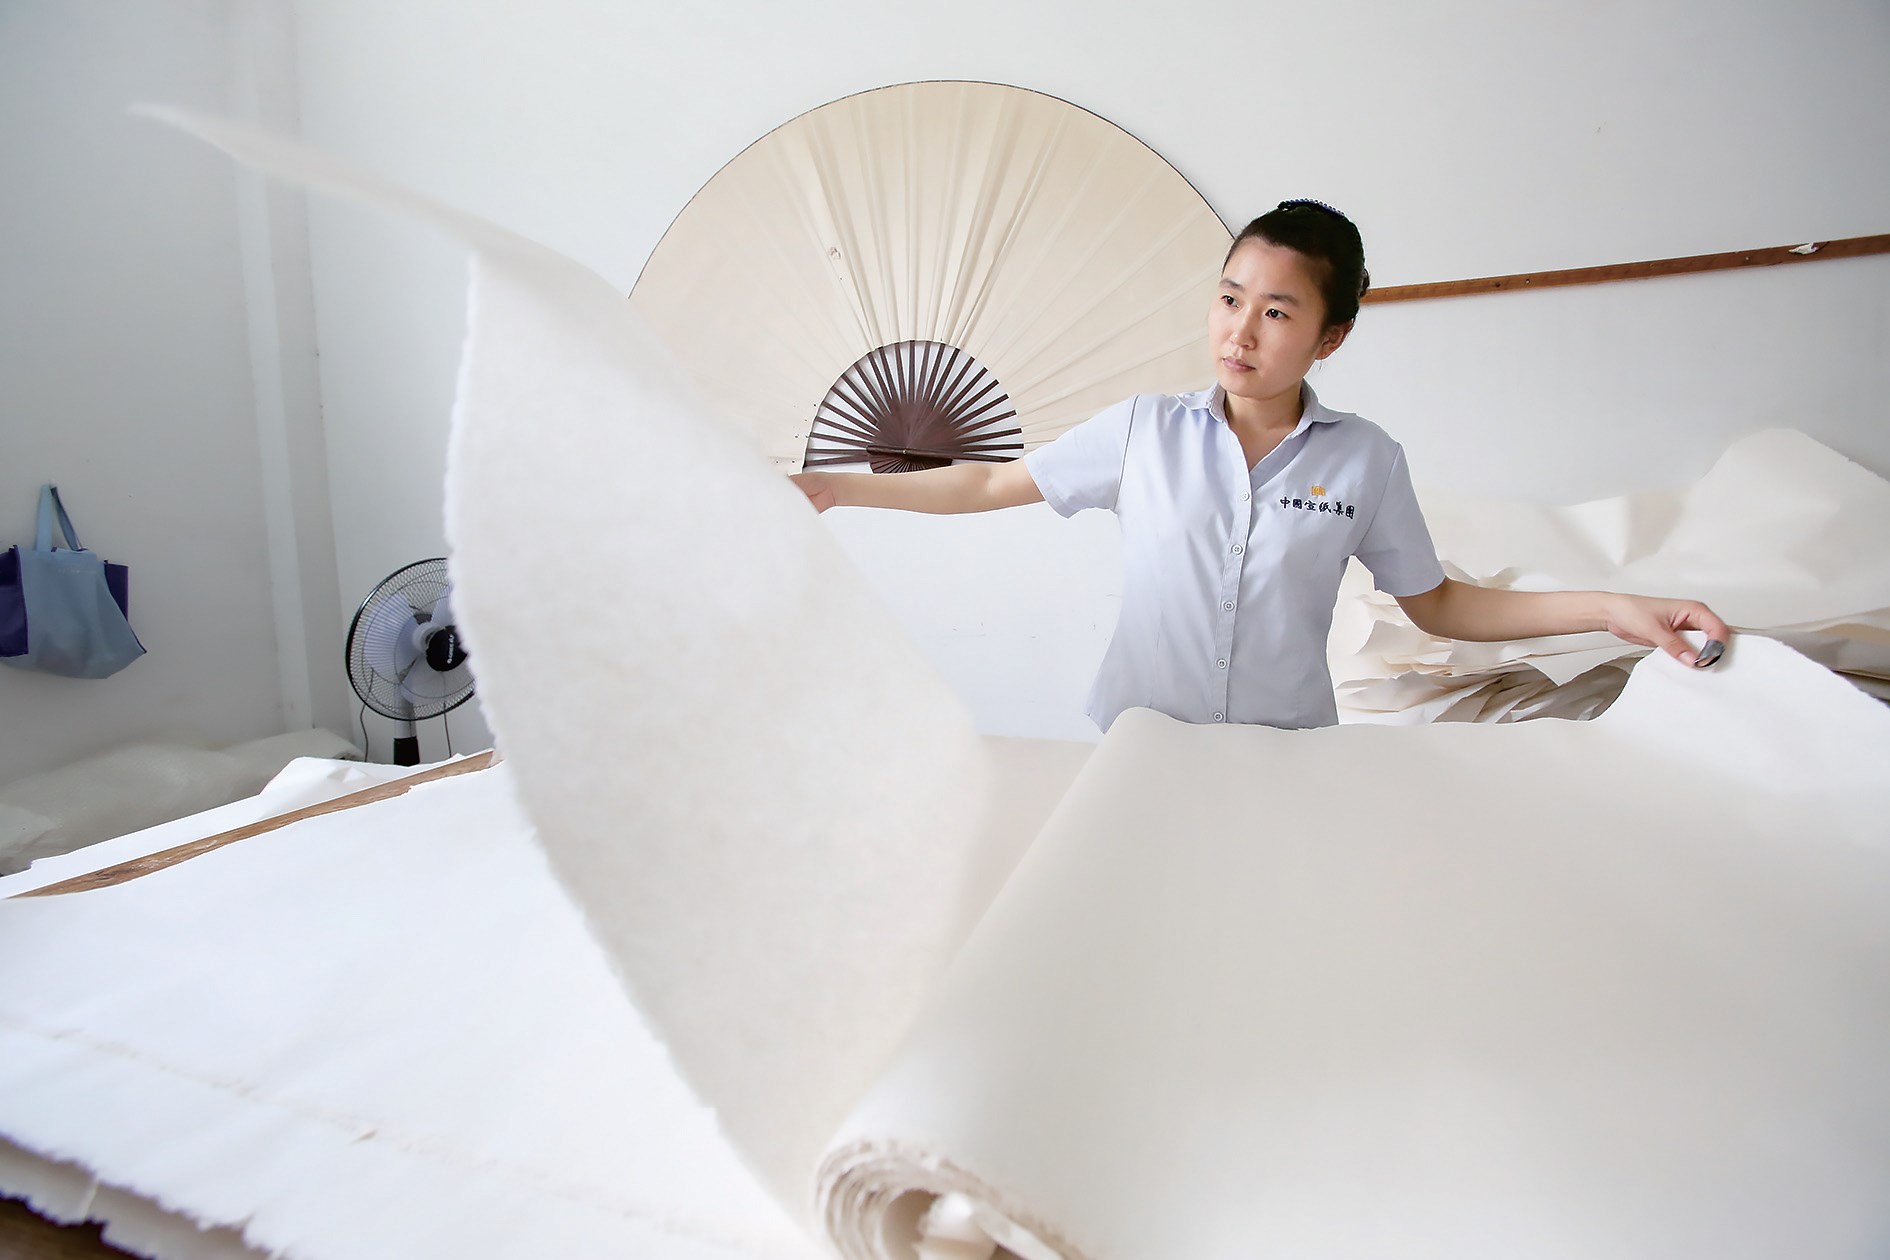 Xuan paper: An icon of Chinese culture - SHINE News